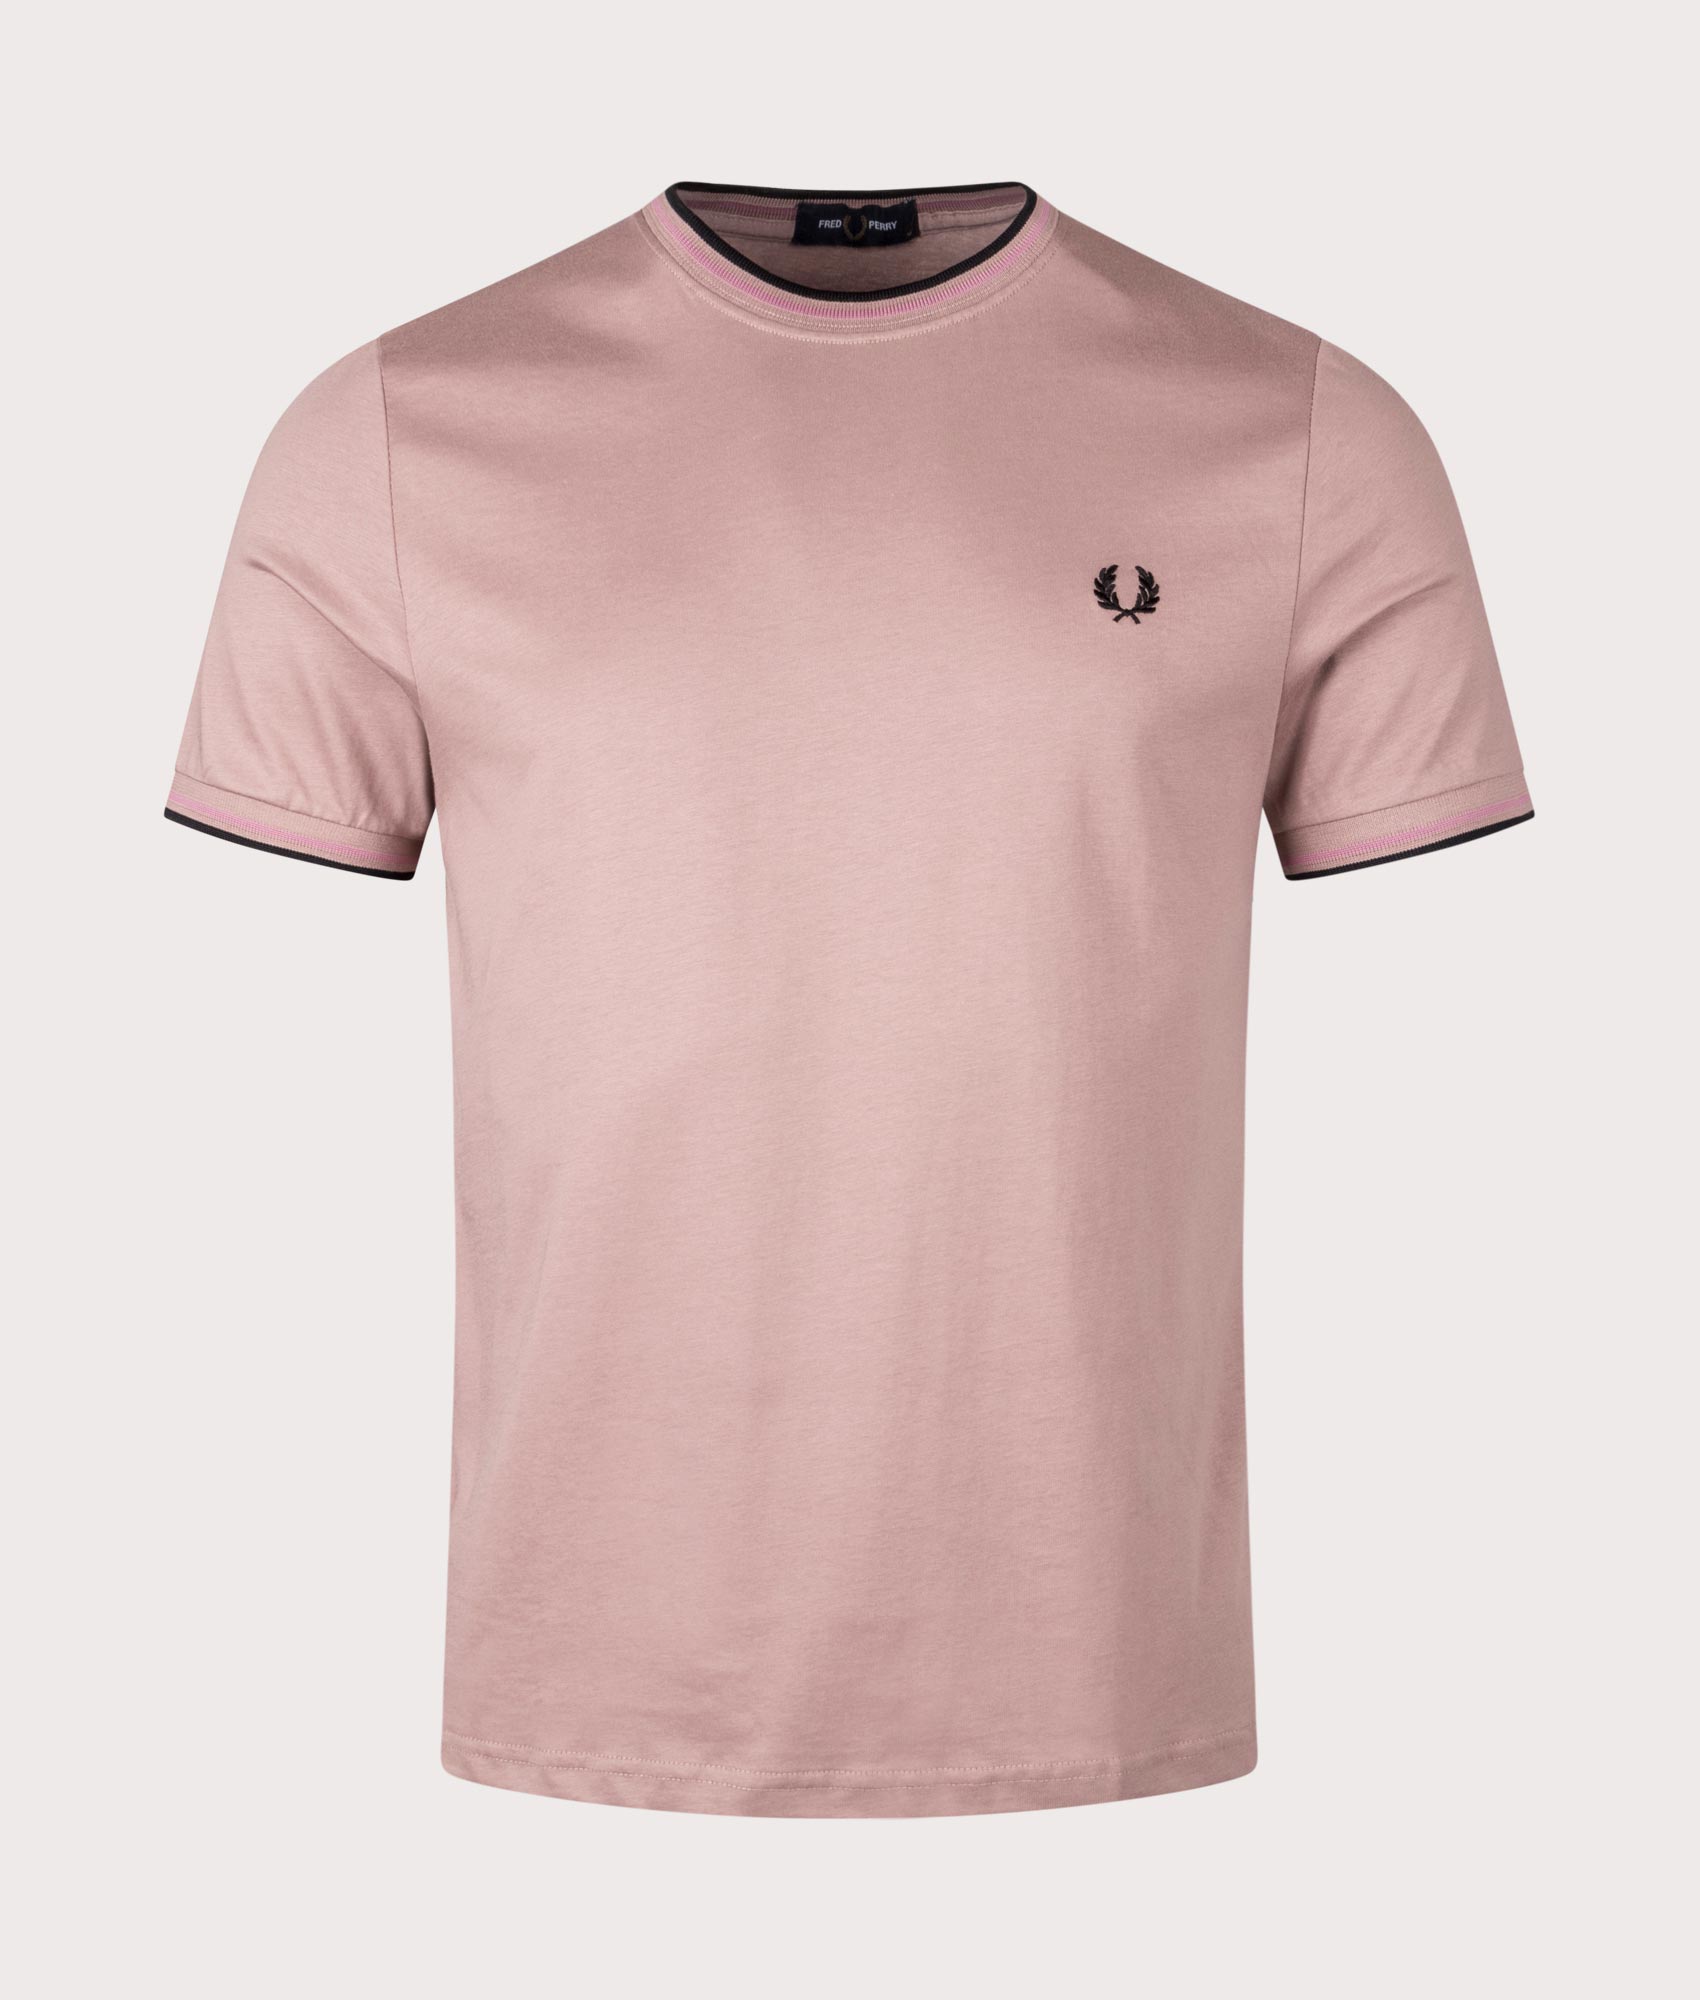 Fred Perry Mens Twin Tipped T-Shirt - Colour: U89 Dark Pink/Dusty Rose/Black - Size: Medium